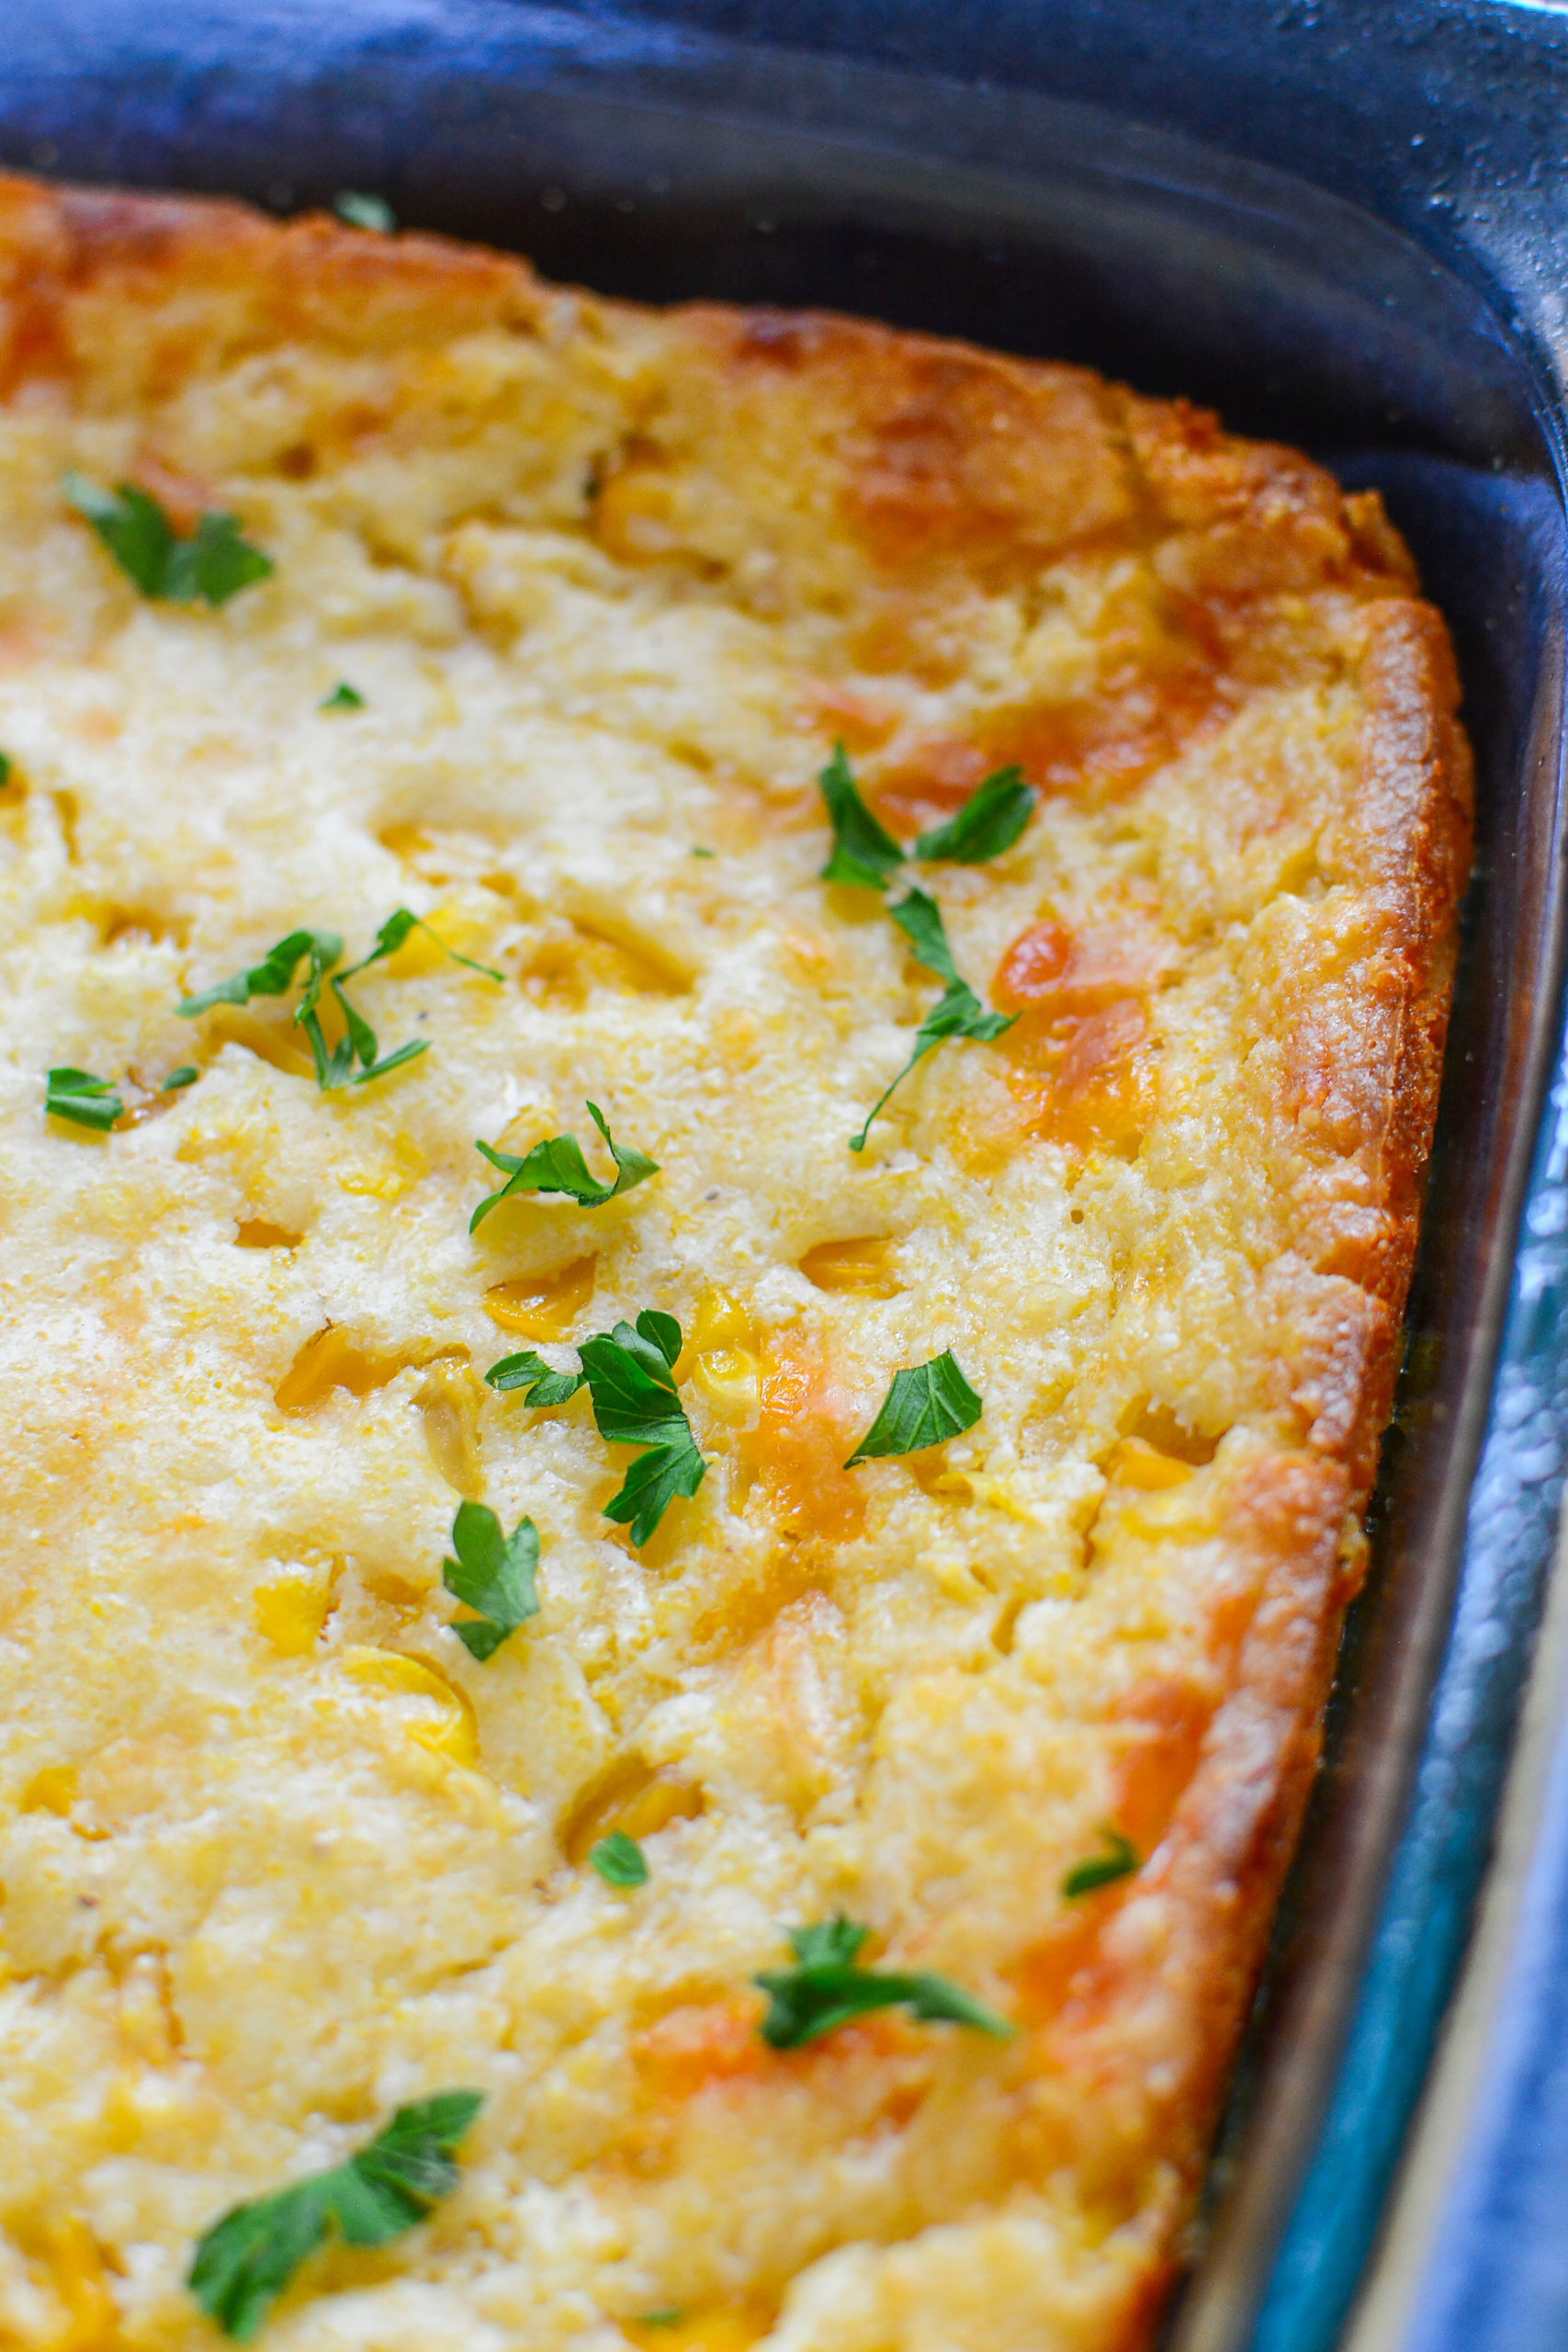  Creamy Cheese Corn Casserole topped with fresh herbs.